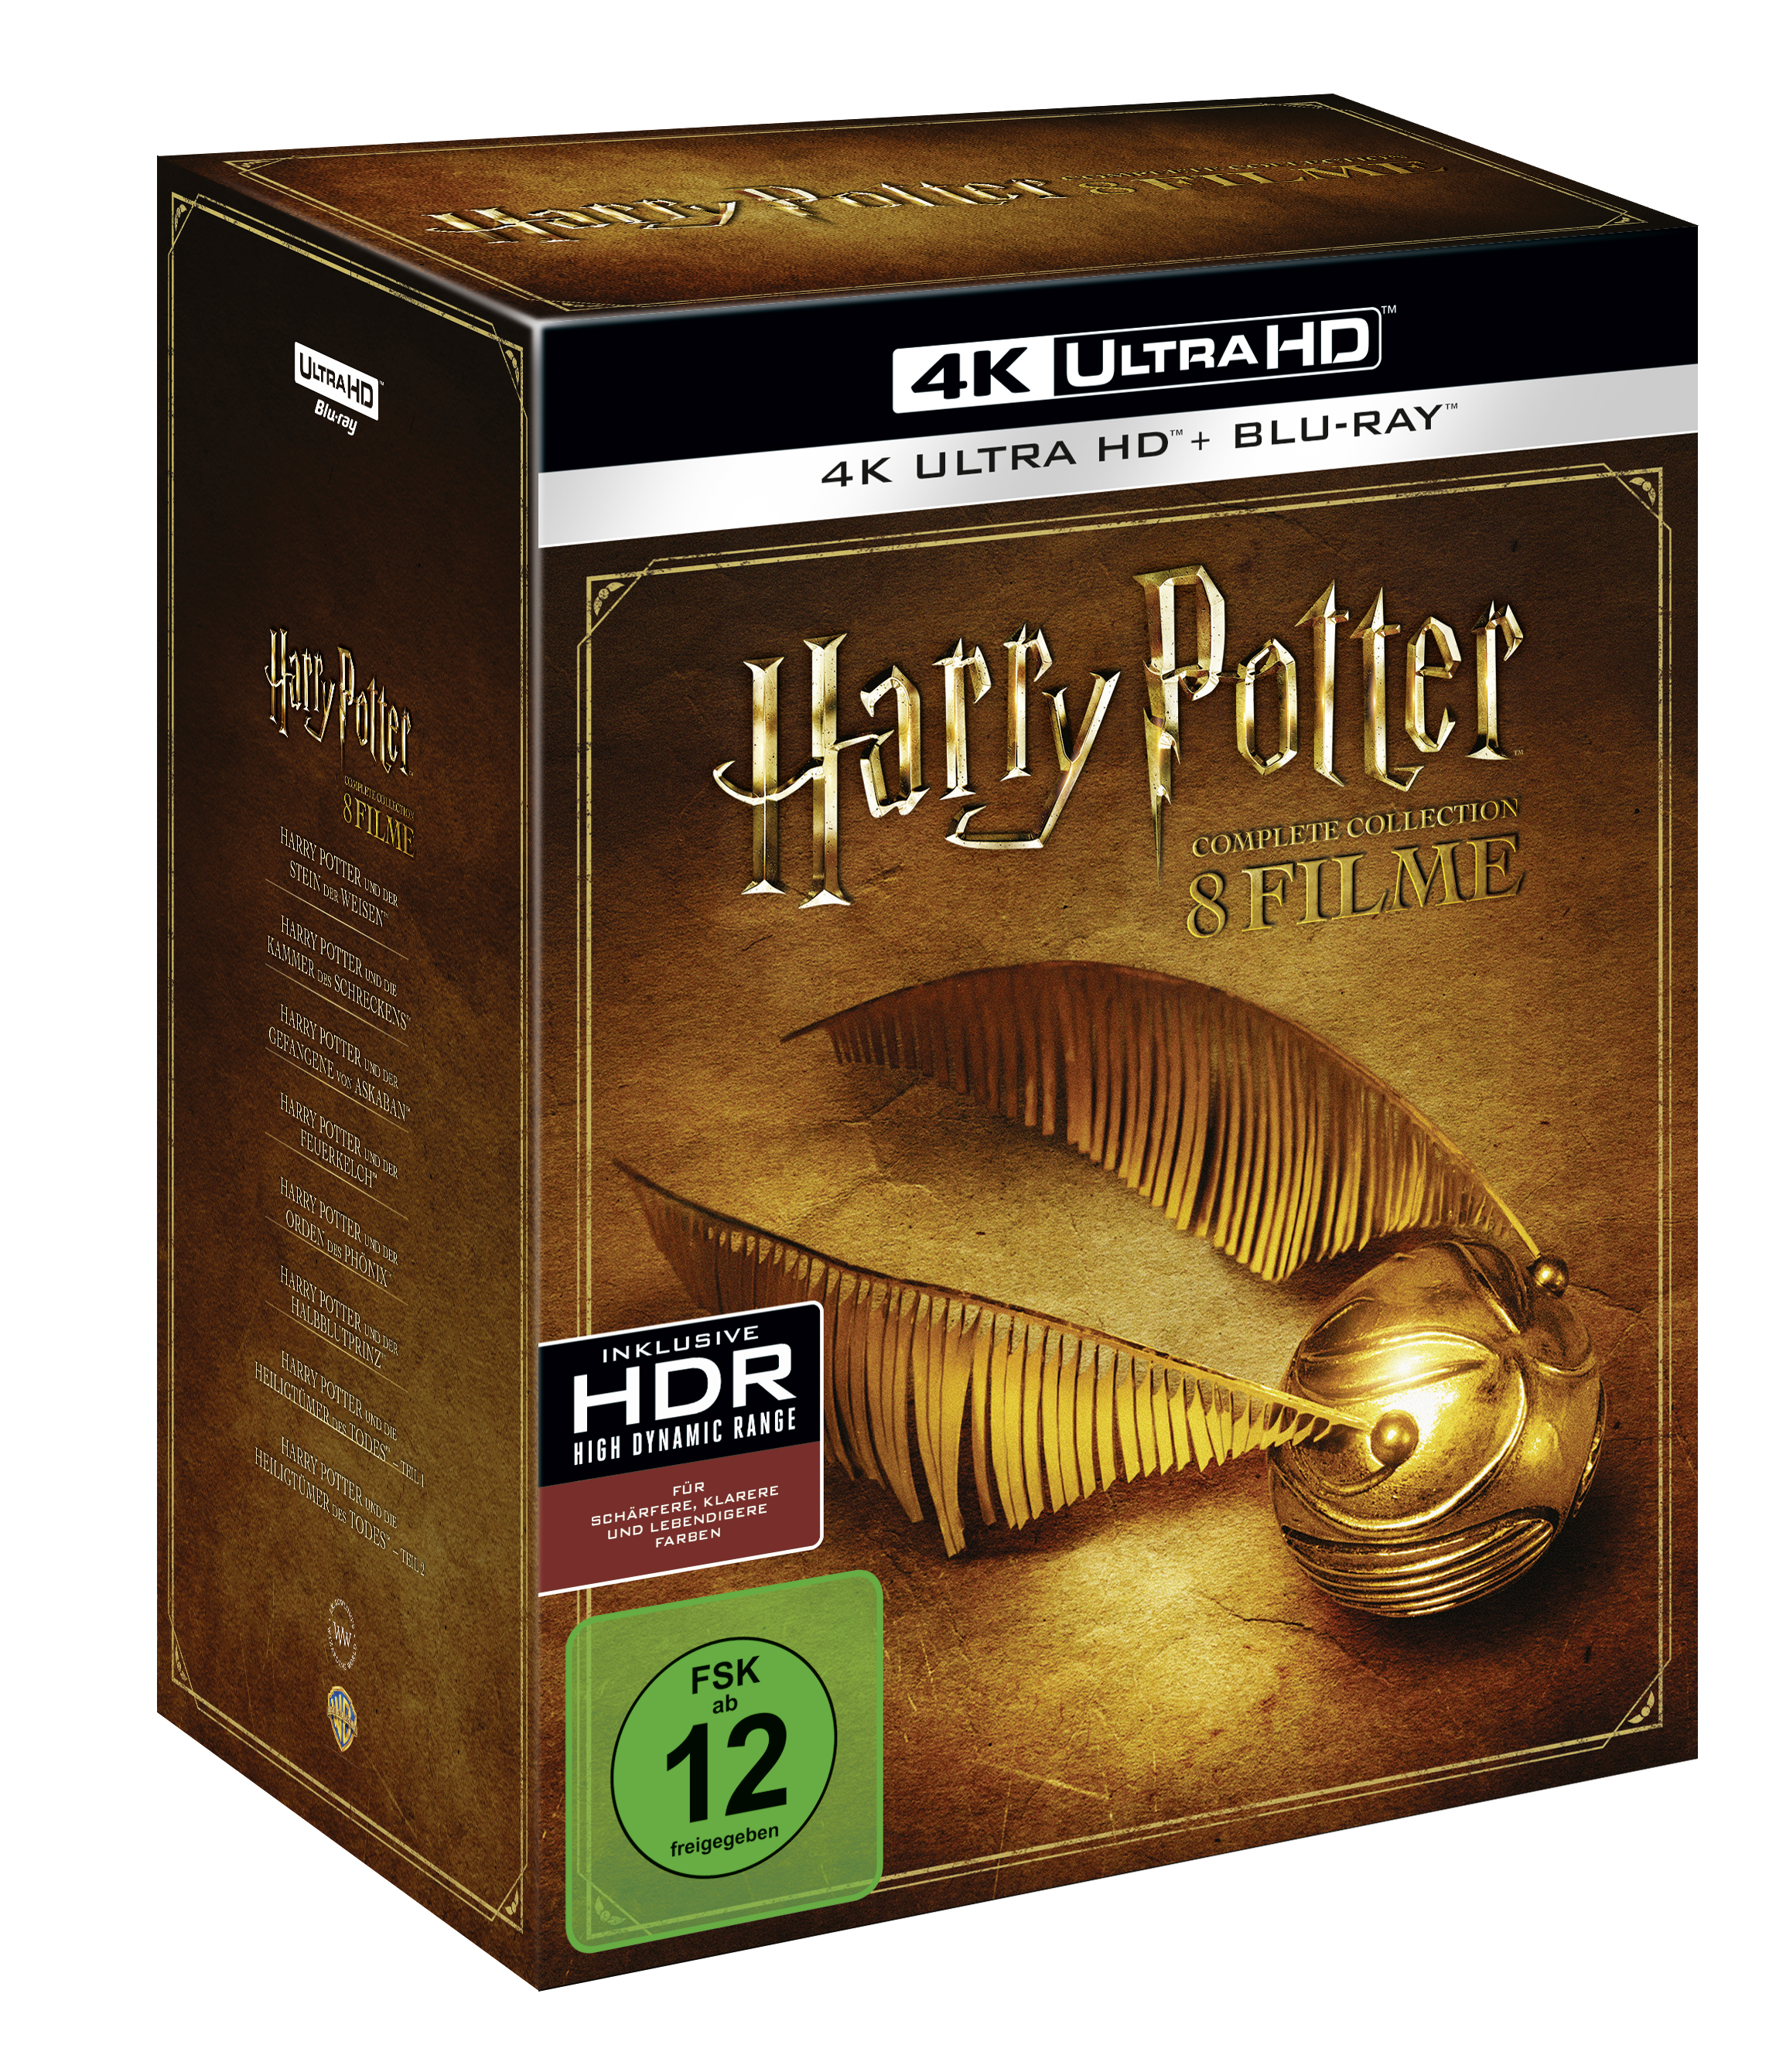 (16-Discs) Collection HD Blu-ray 4K Ultra Harry 4K Complete Potter